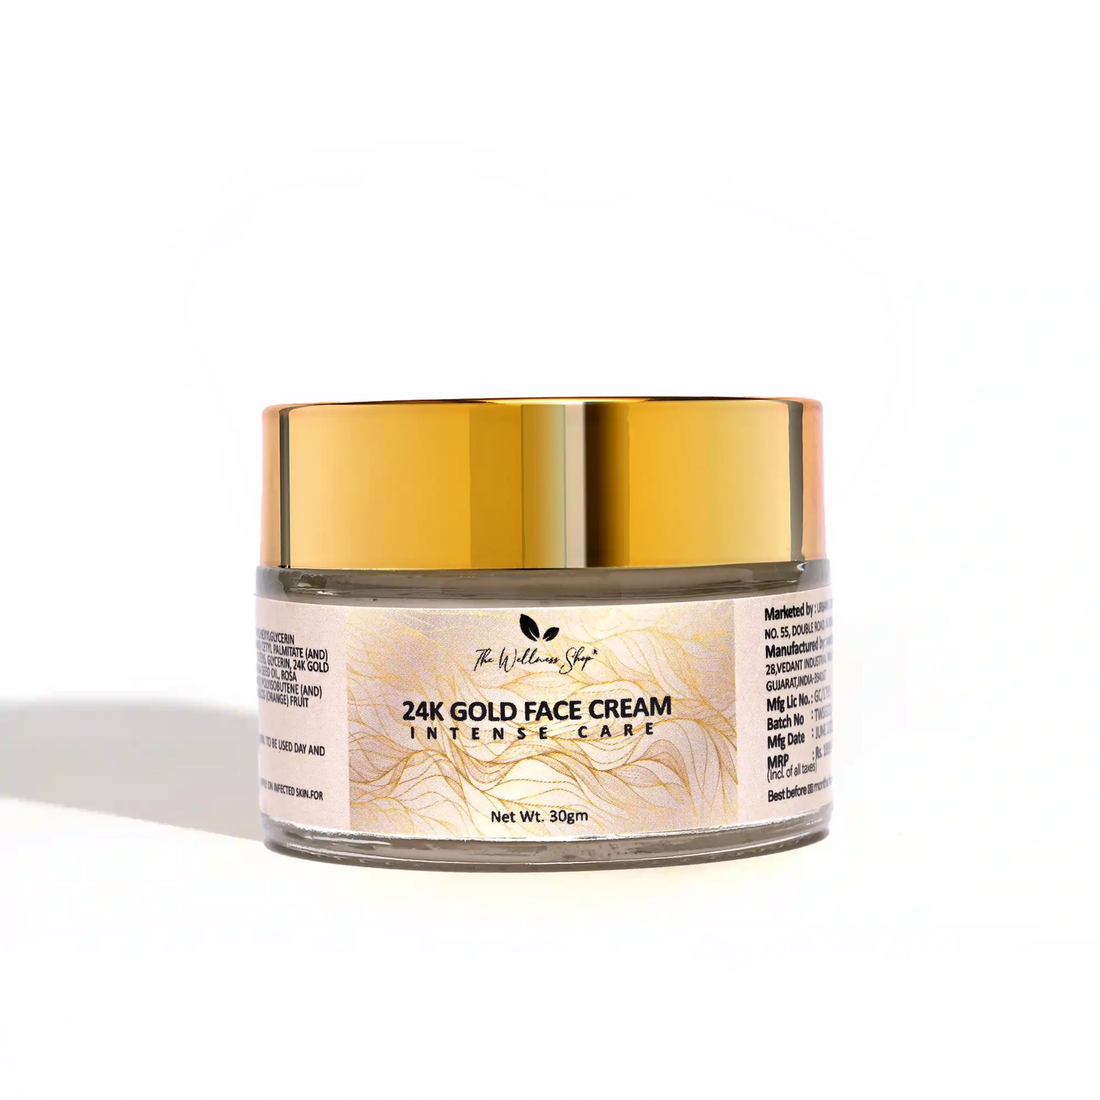 24K GOLD FACE CREAM FOR A YOUTHFUL GLOW